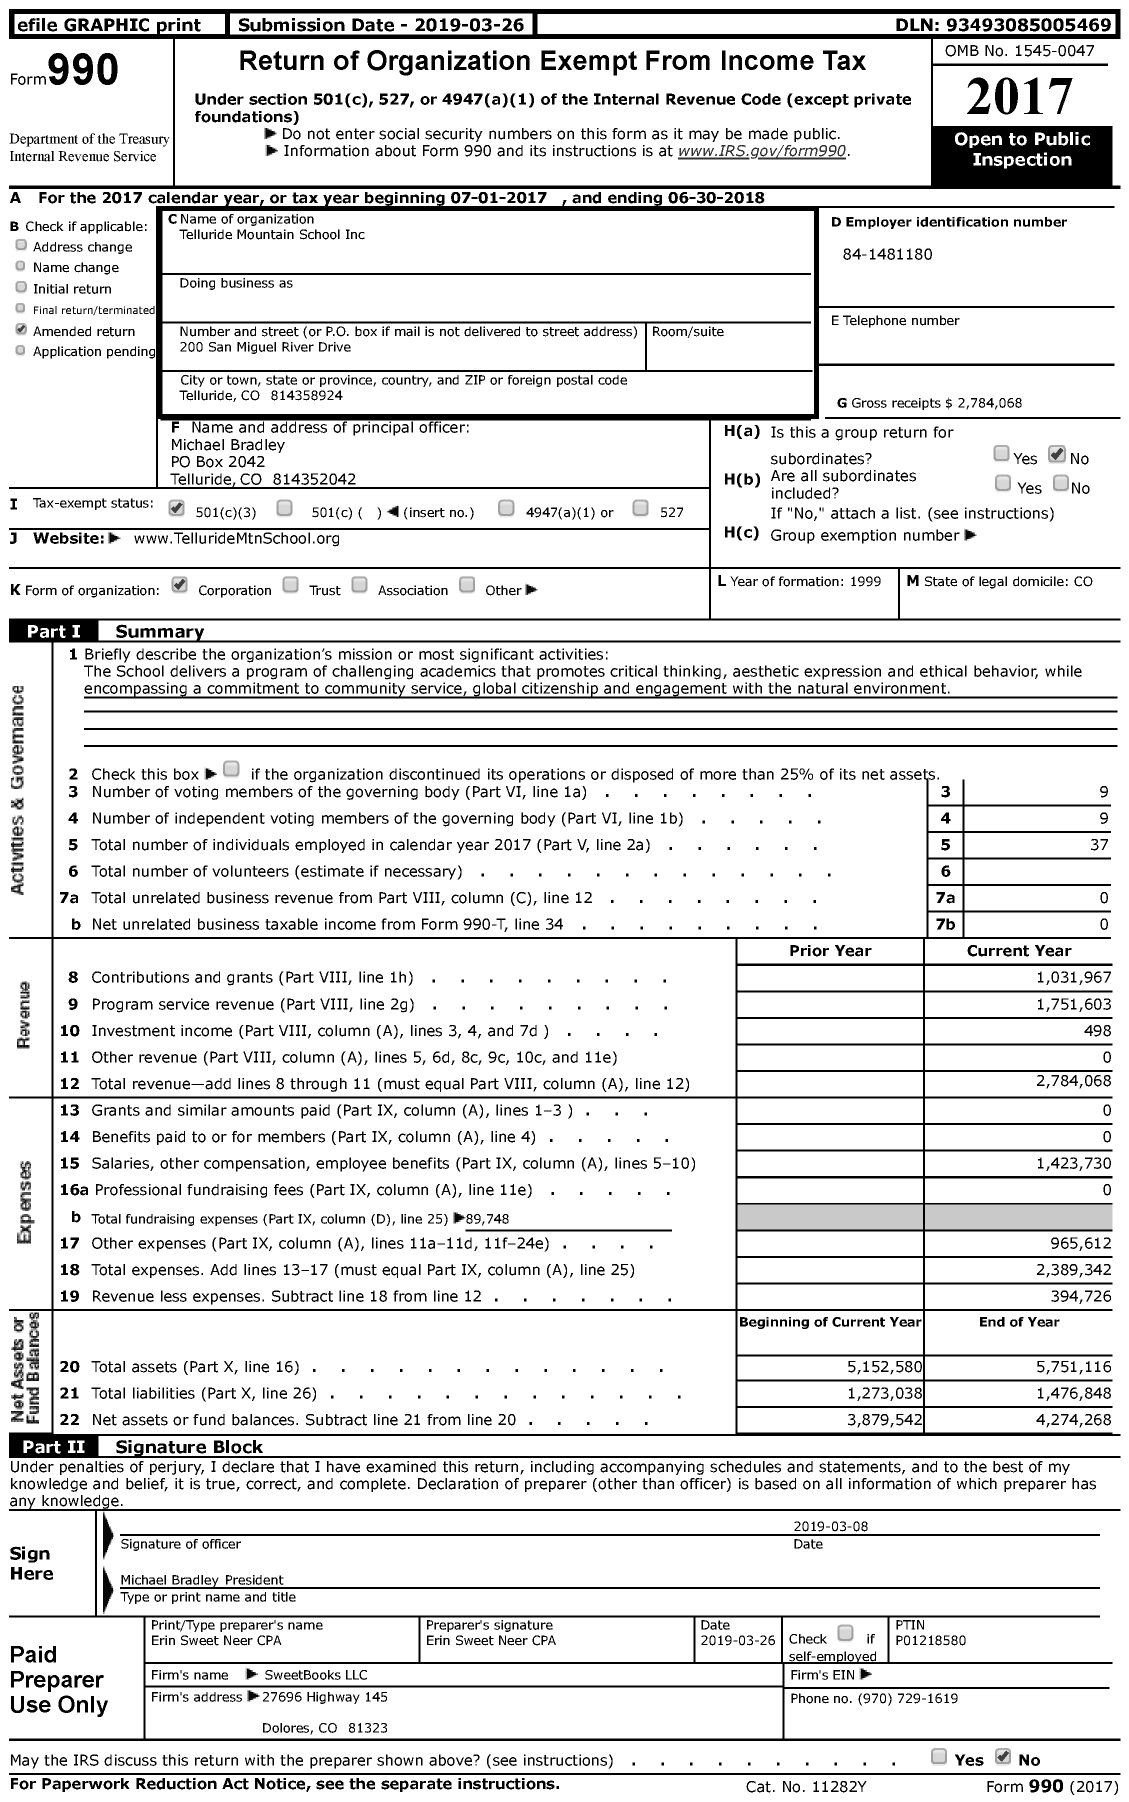 Image of first page of 2017 Form 990 for Telluride Mountain School